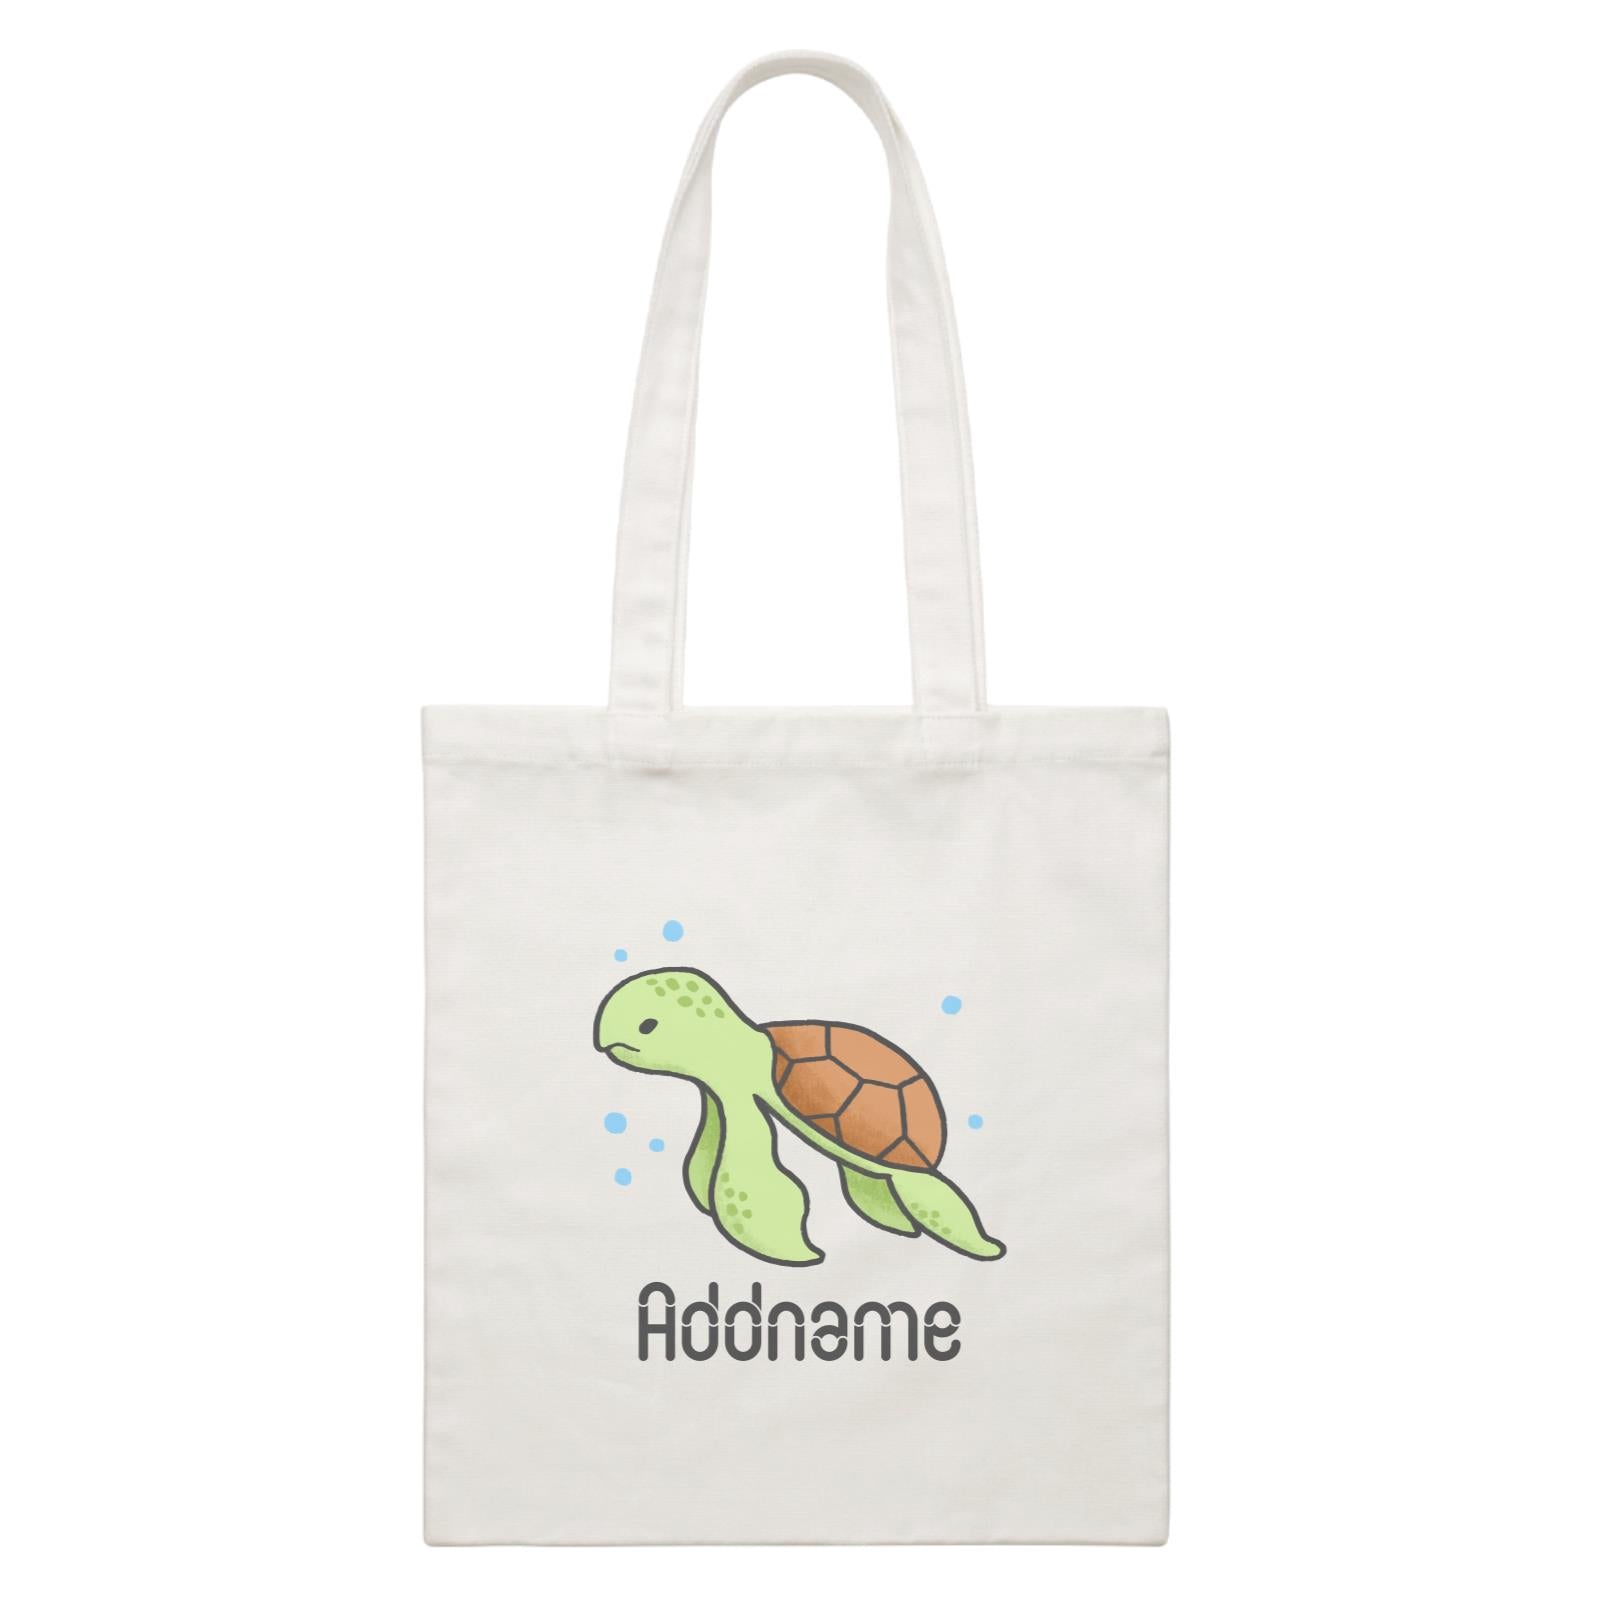 Cute Hand Drawn Style Turtle Addname White Canvas Bag